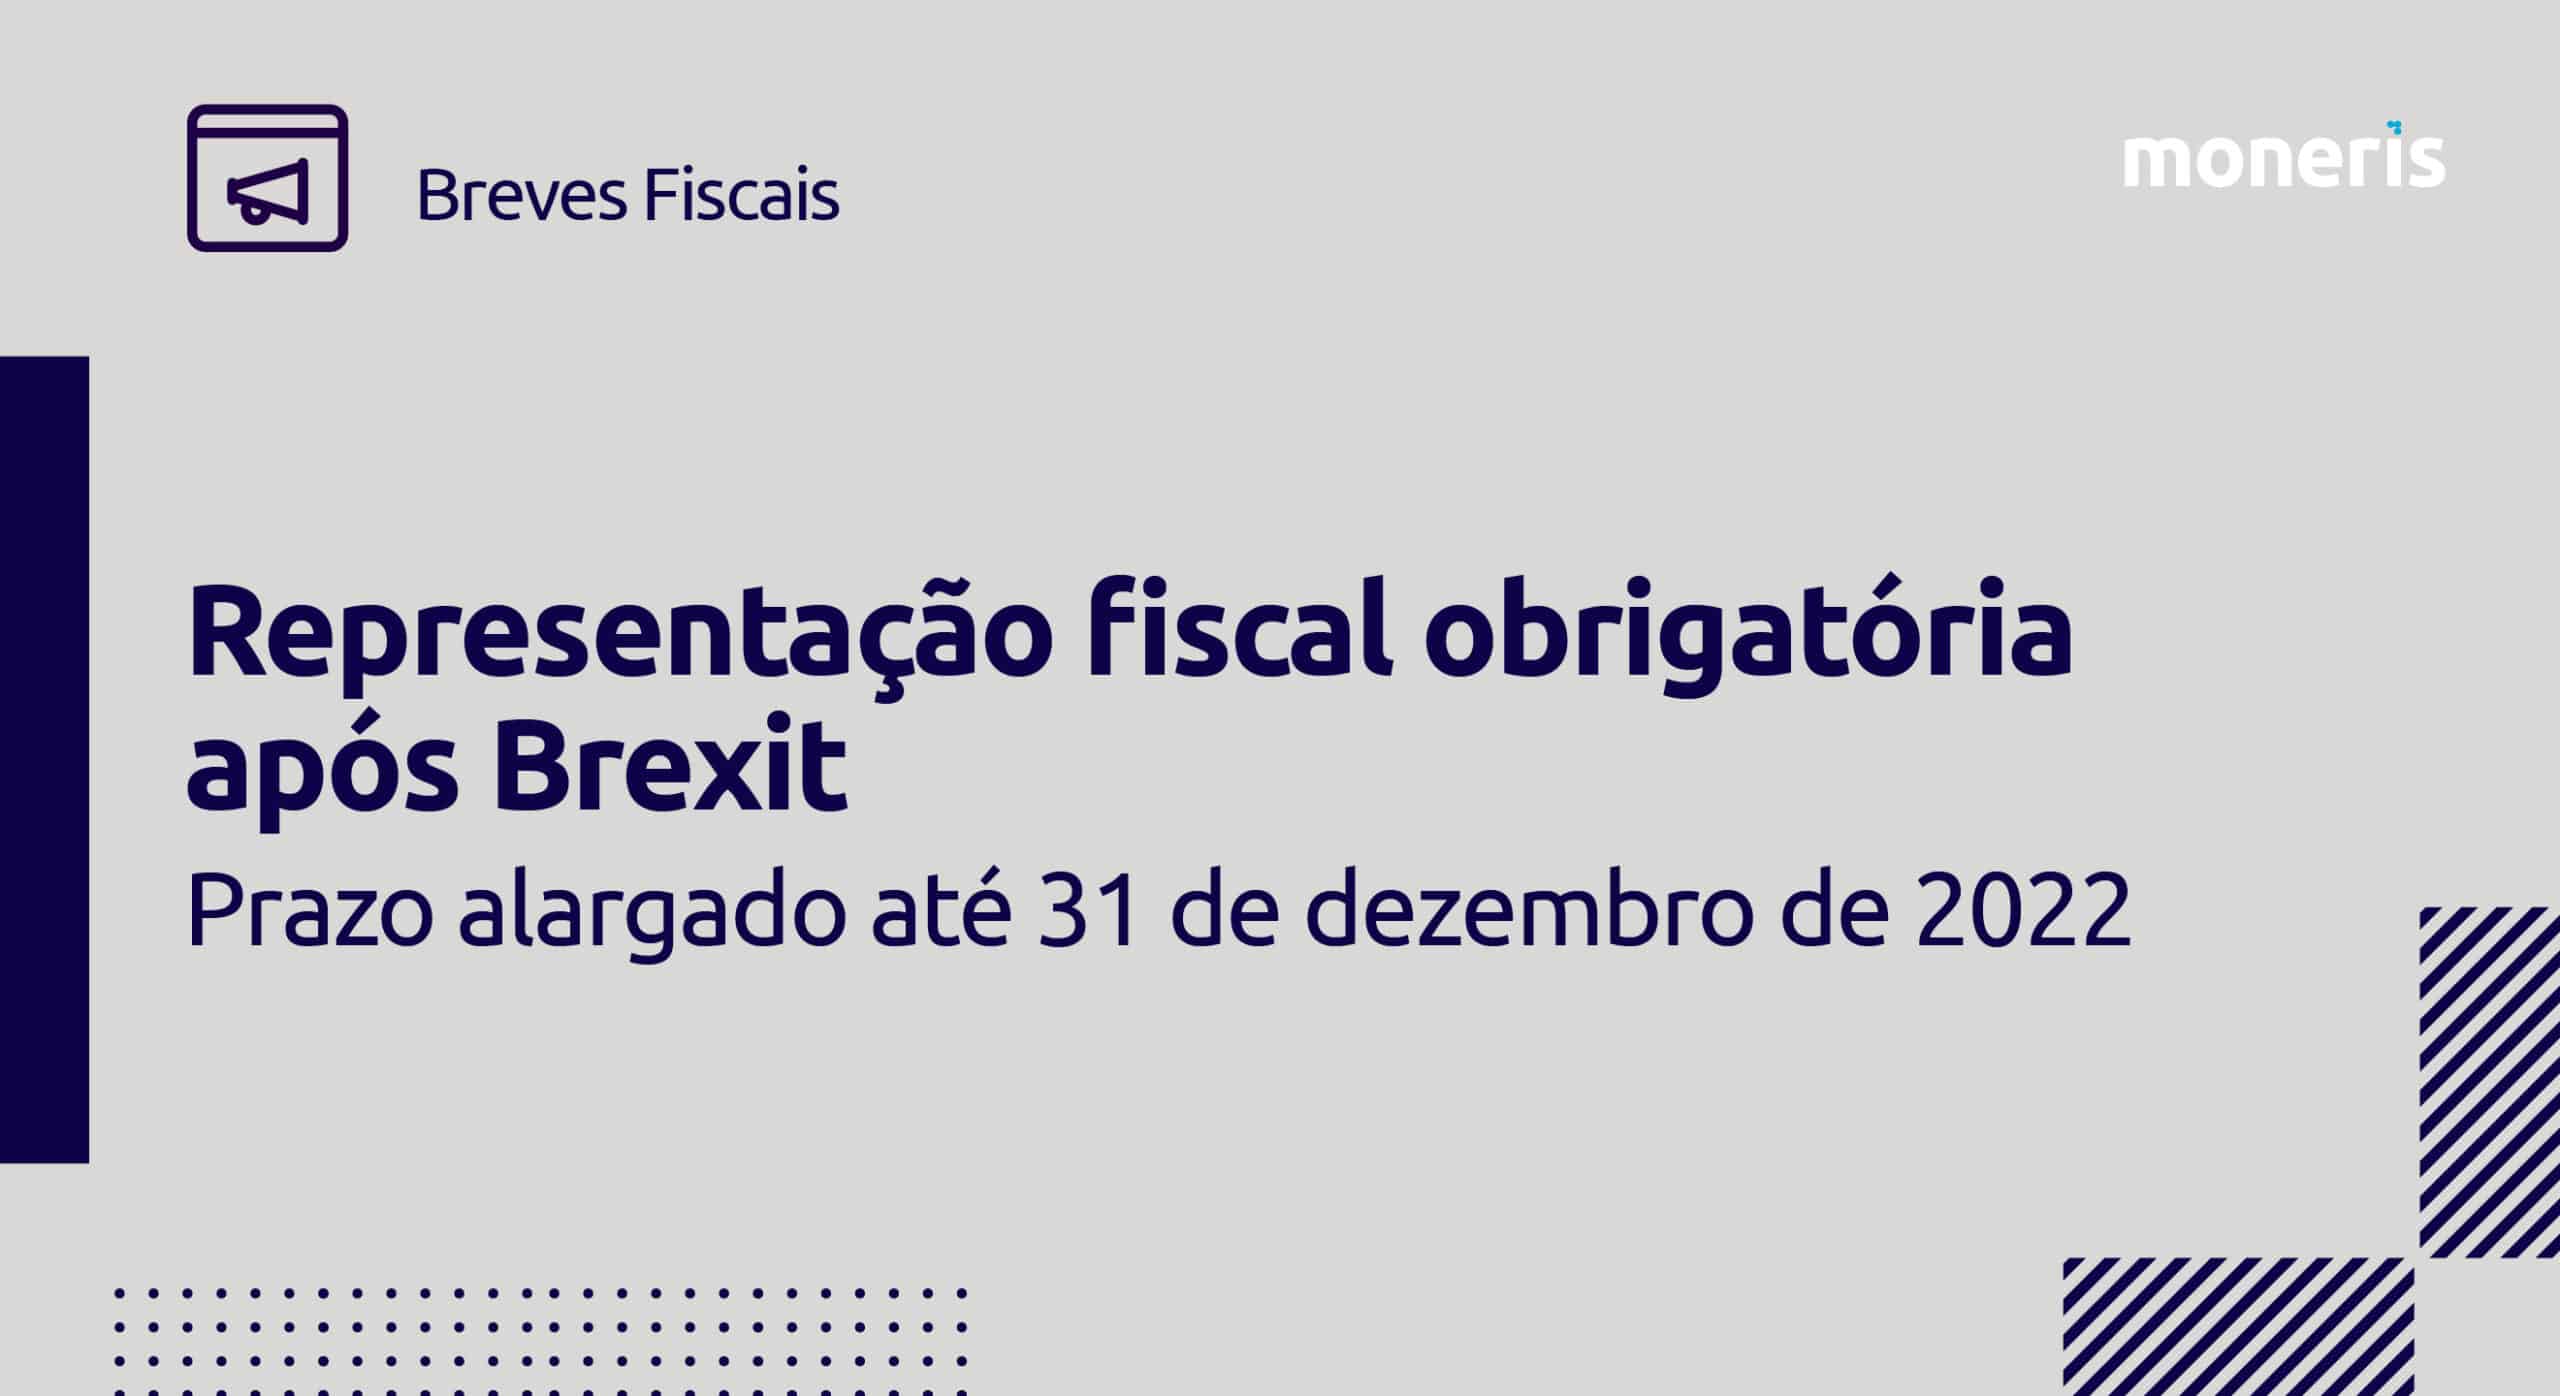 breves fiscais parazobrexit scaled